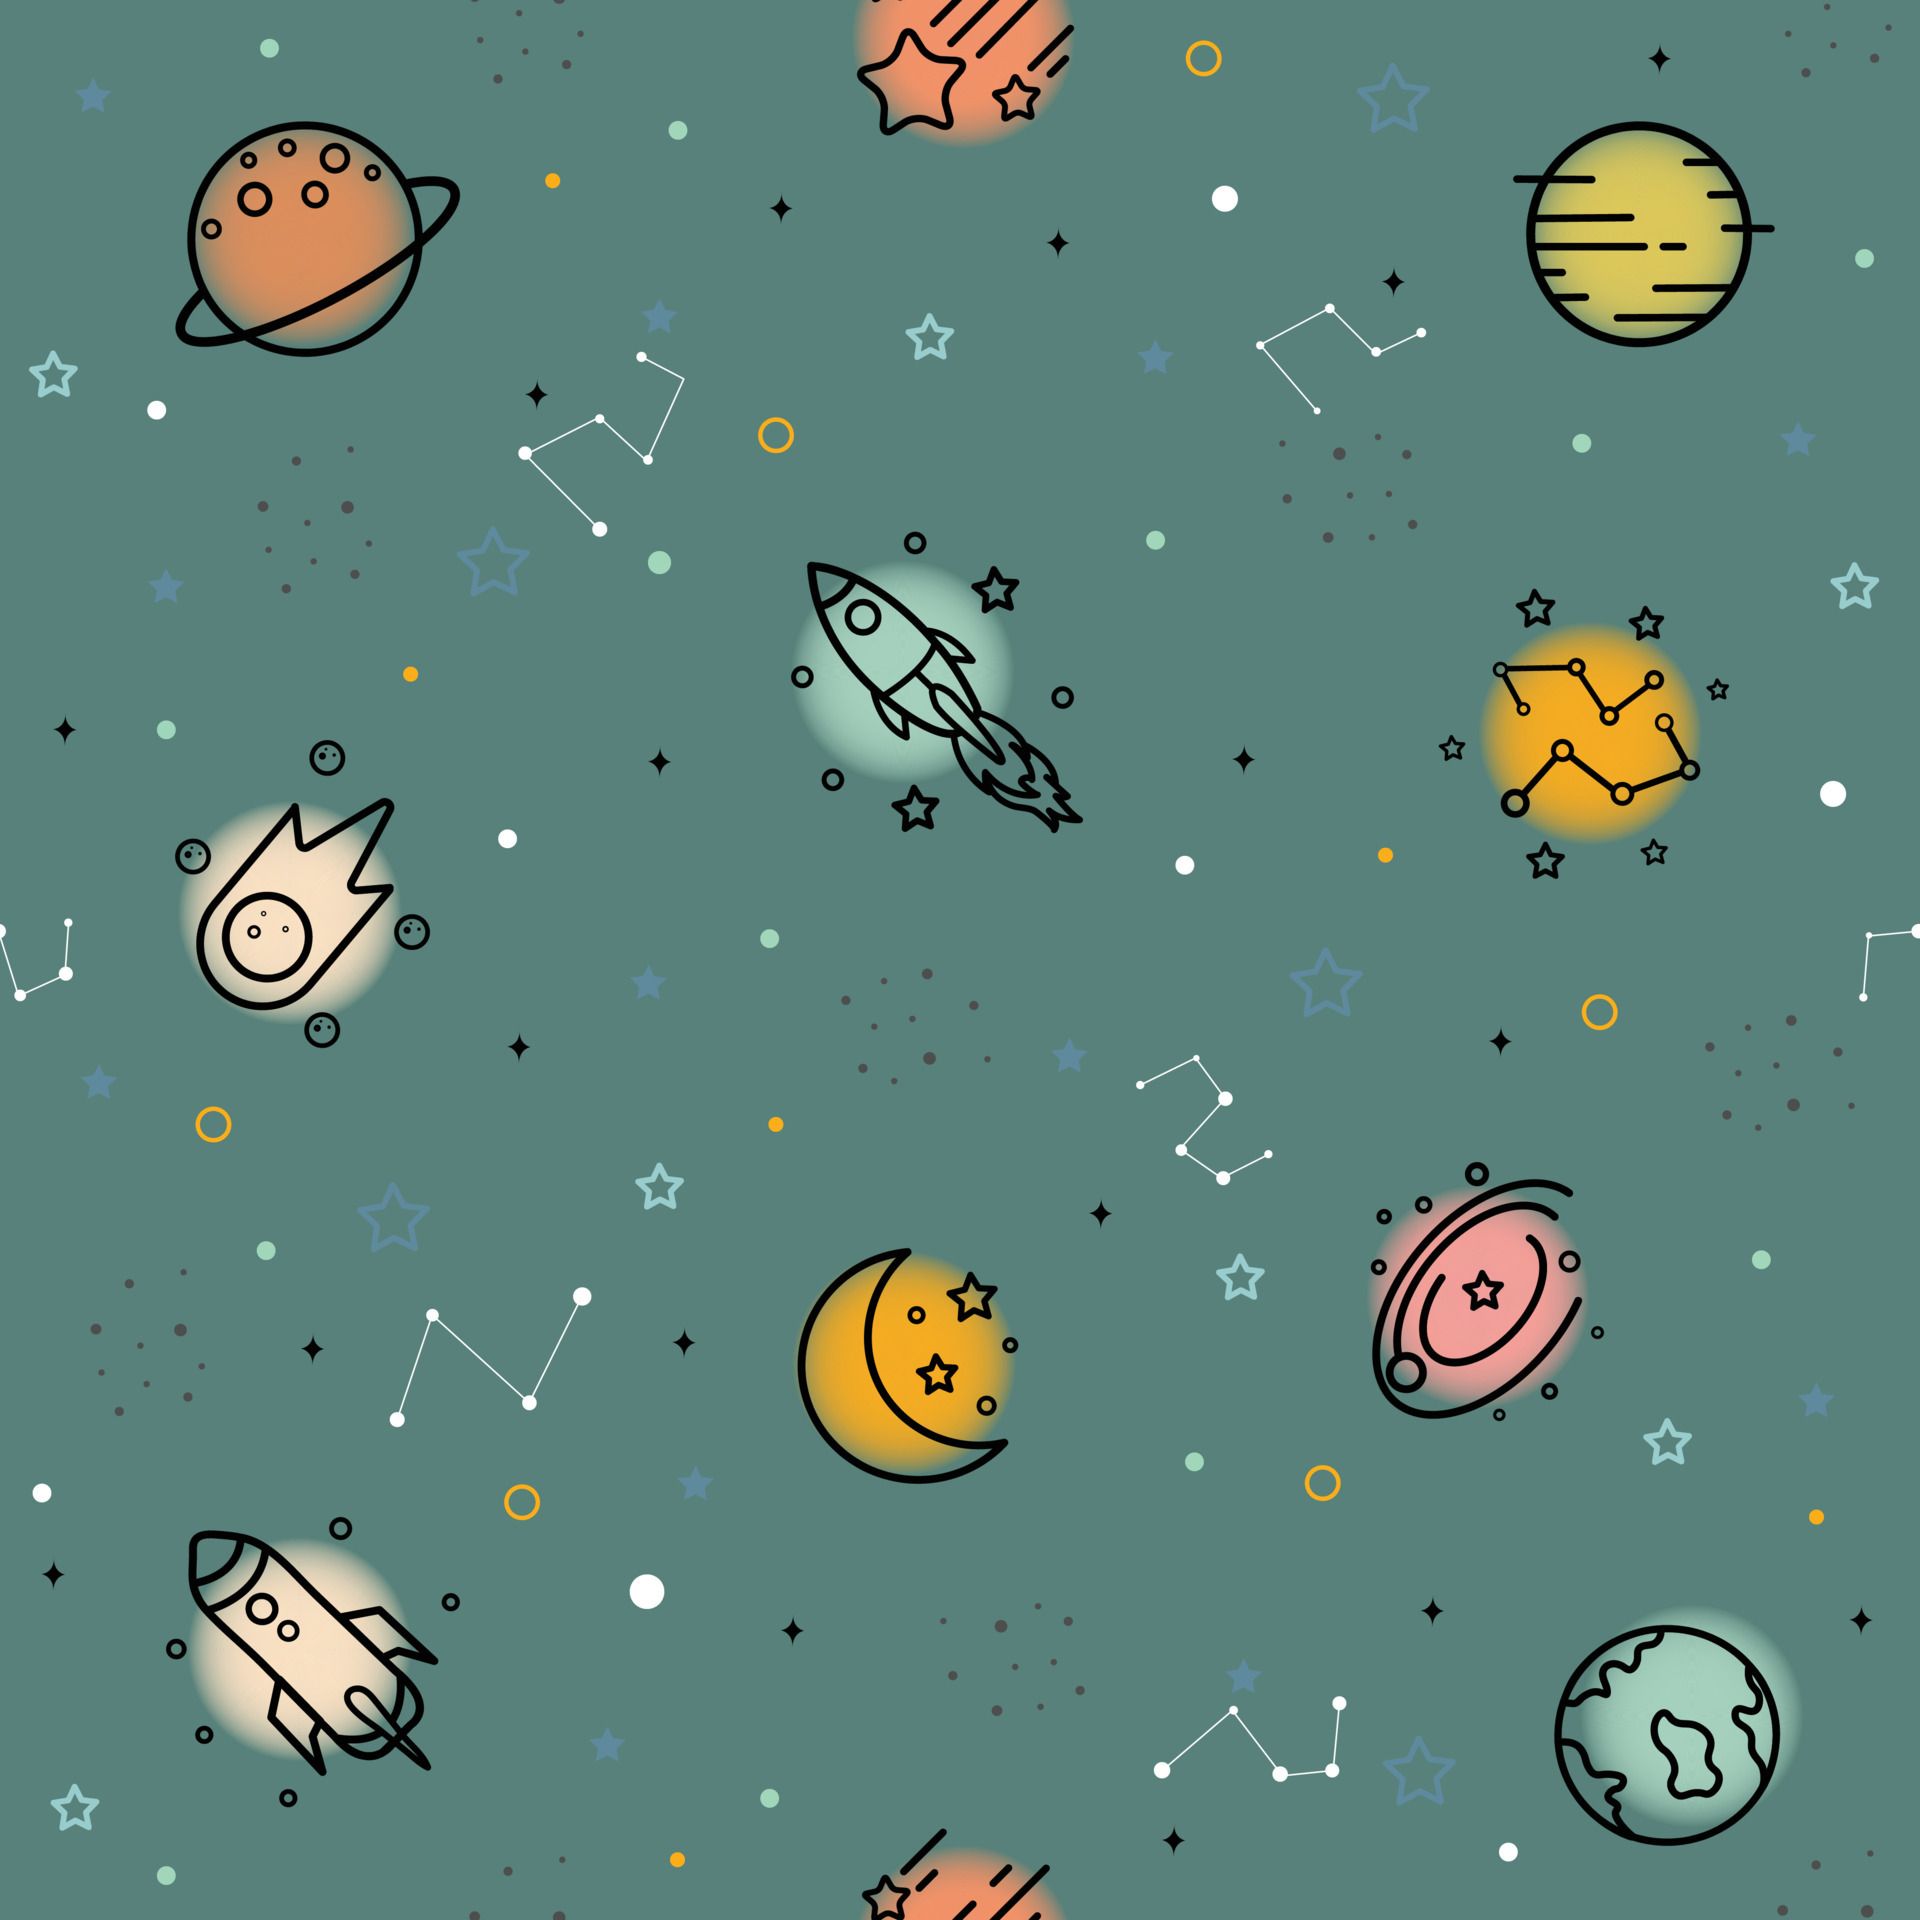 Cute seamless pattern for kids Background image of stars, planets and spaceships Design concepts used for Printing, textiles, children's clothing patterns, gift wrap. Vector illustration